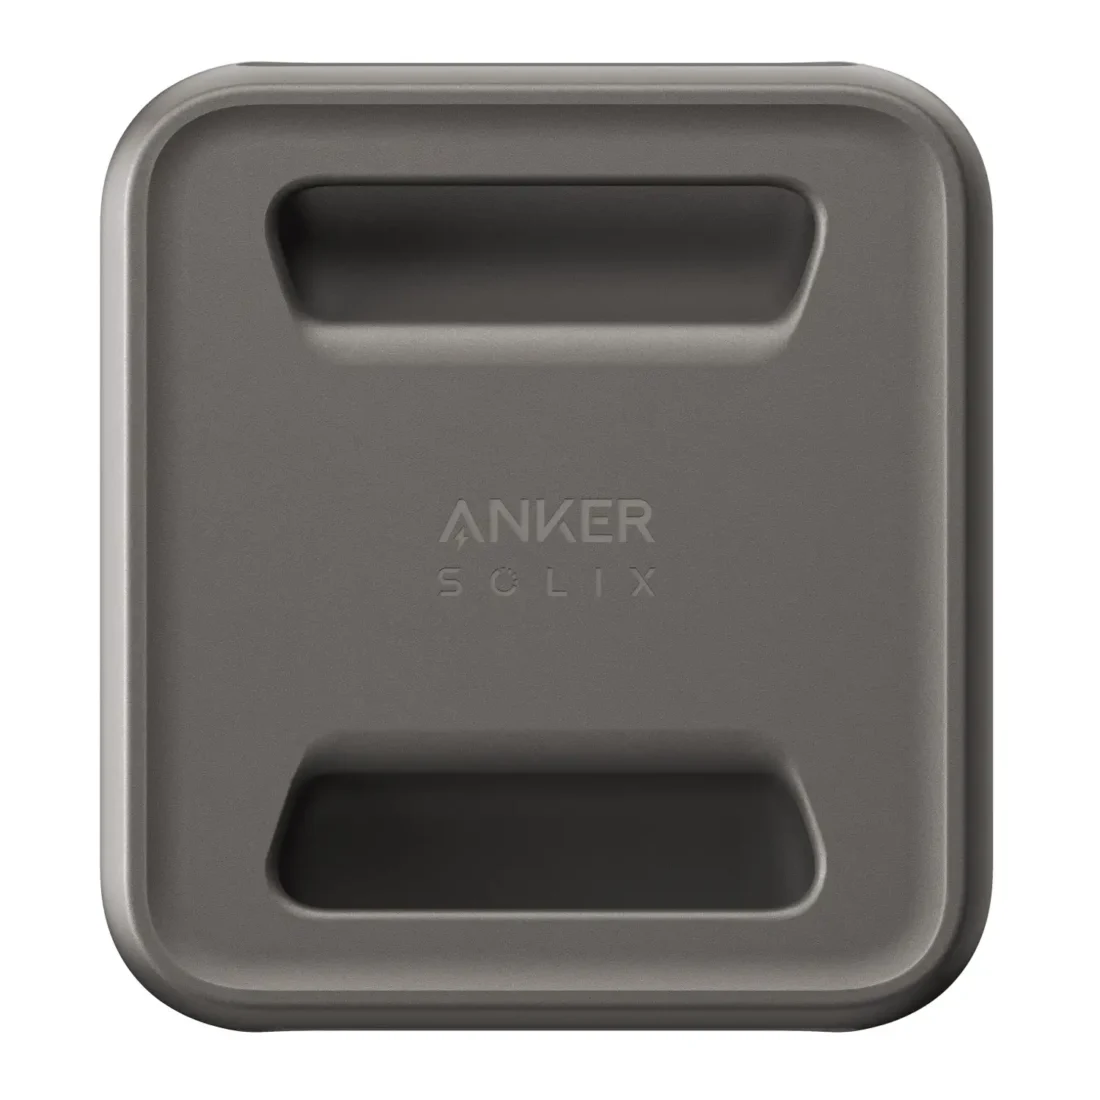 Anker SOLIX F3800EB Expansion Battery